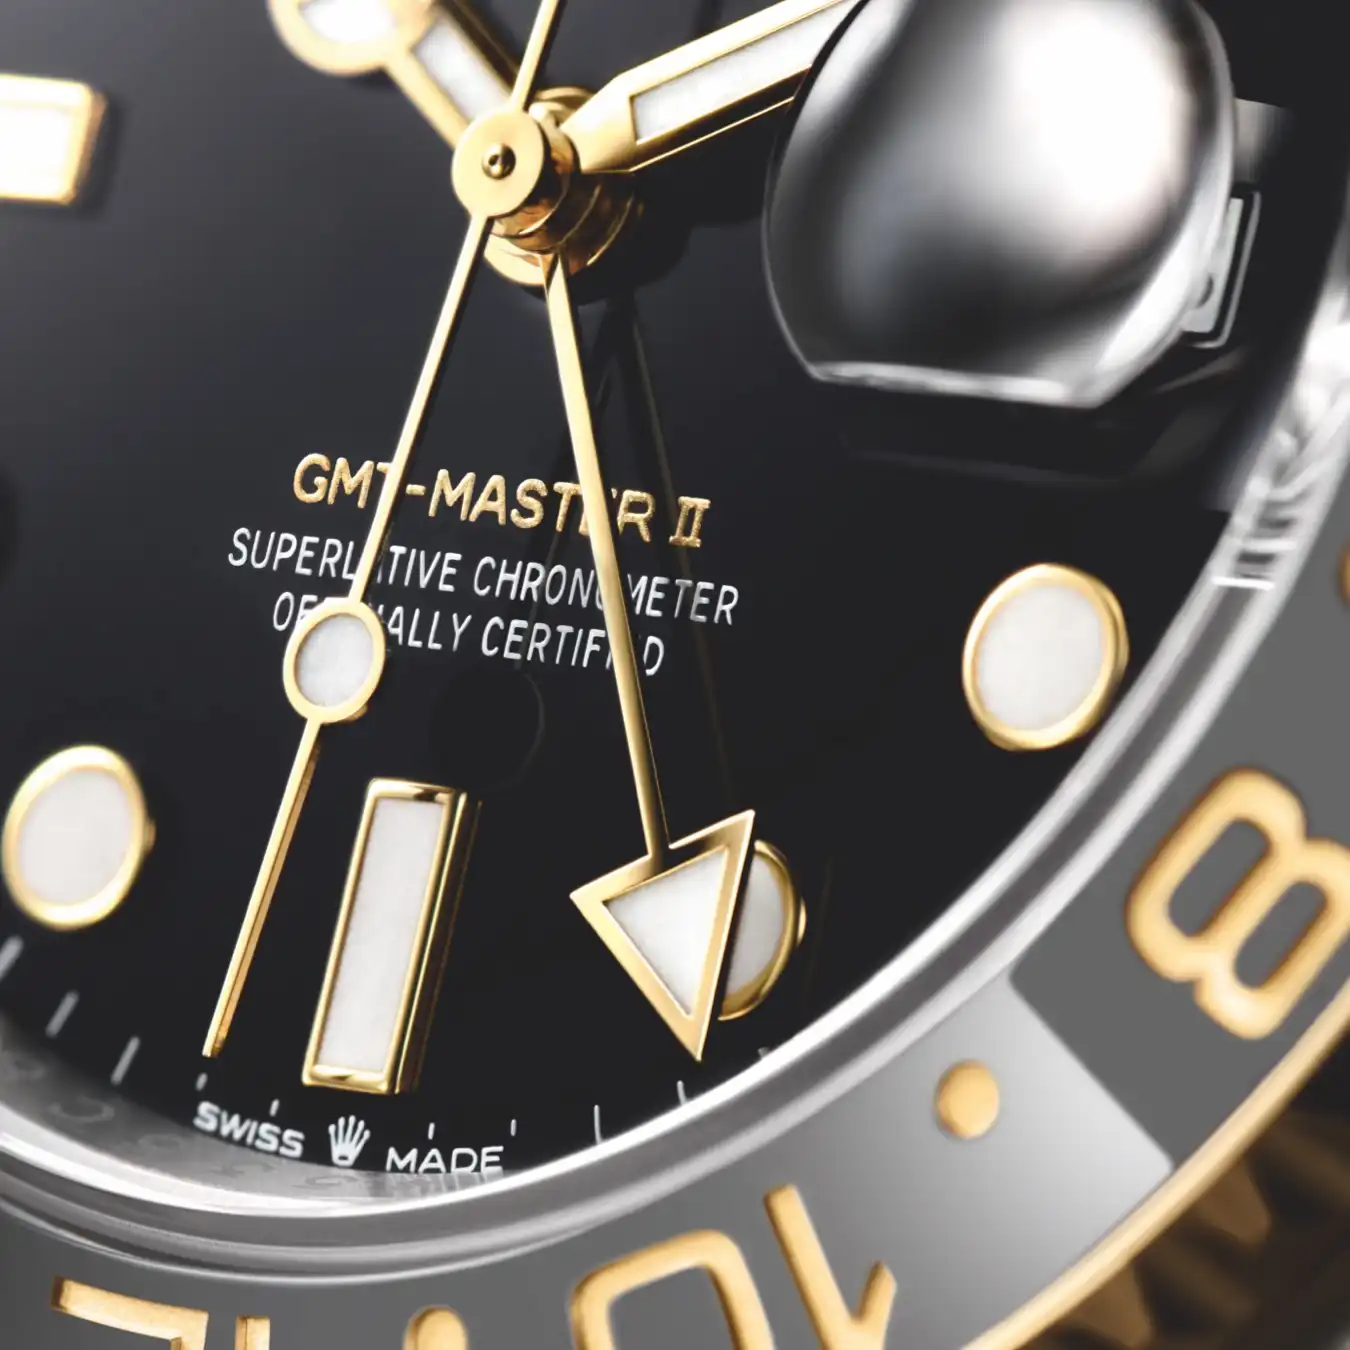 The Cosmopolitan Watch I Rolex GMT-Master II at CFK